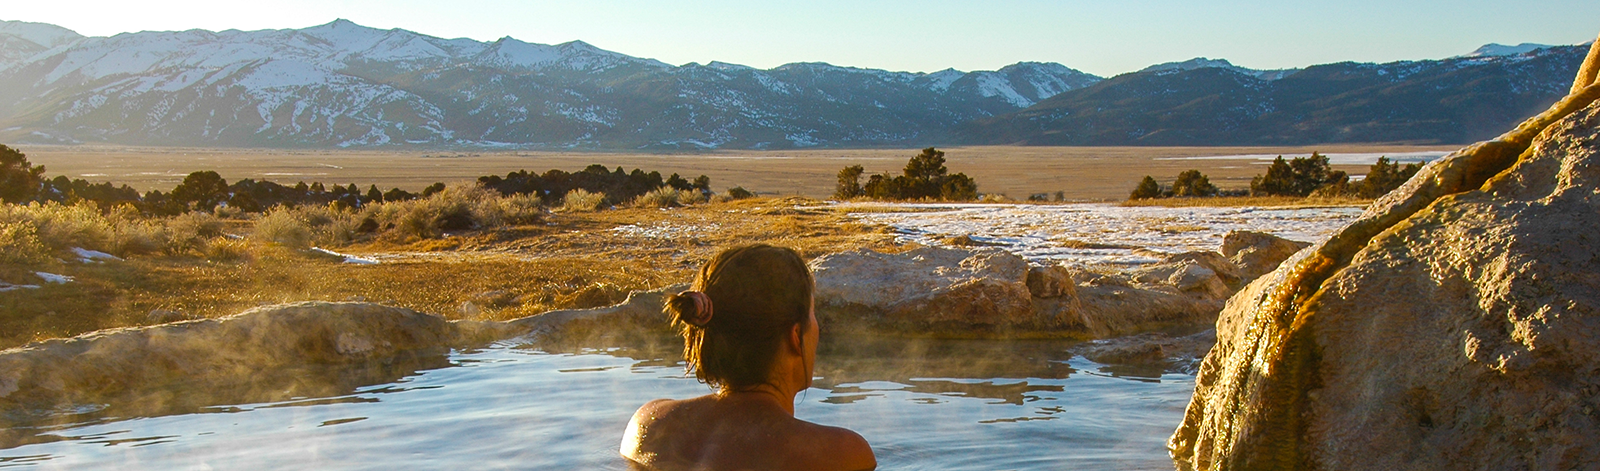 Where to Find Natural Hot Springs in California